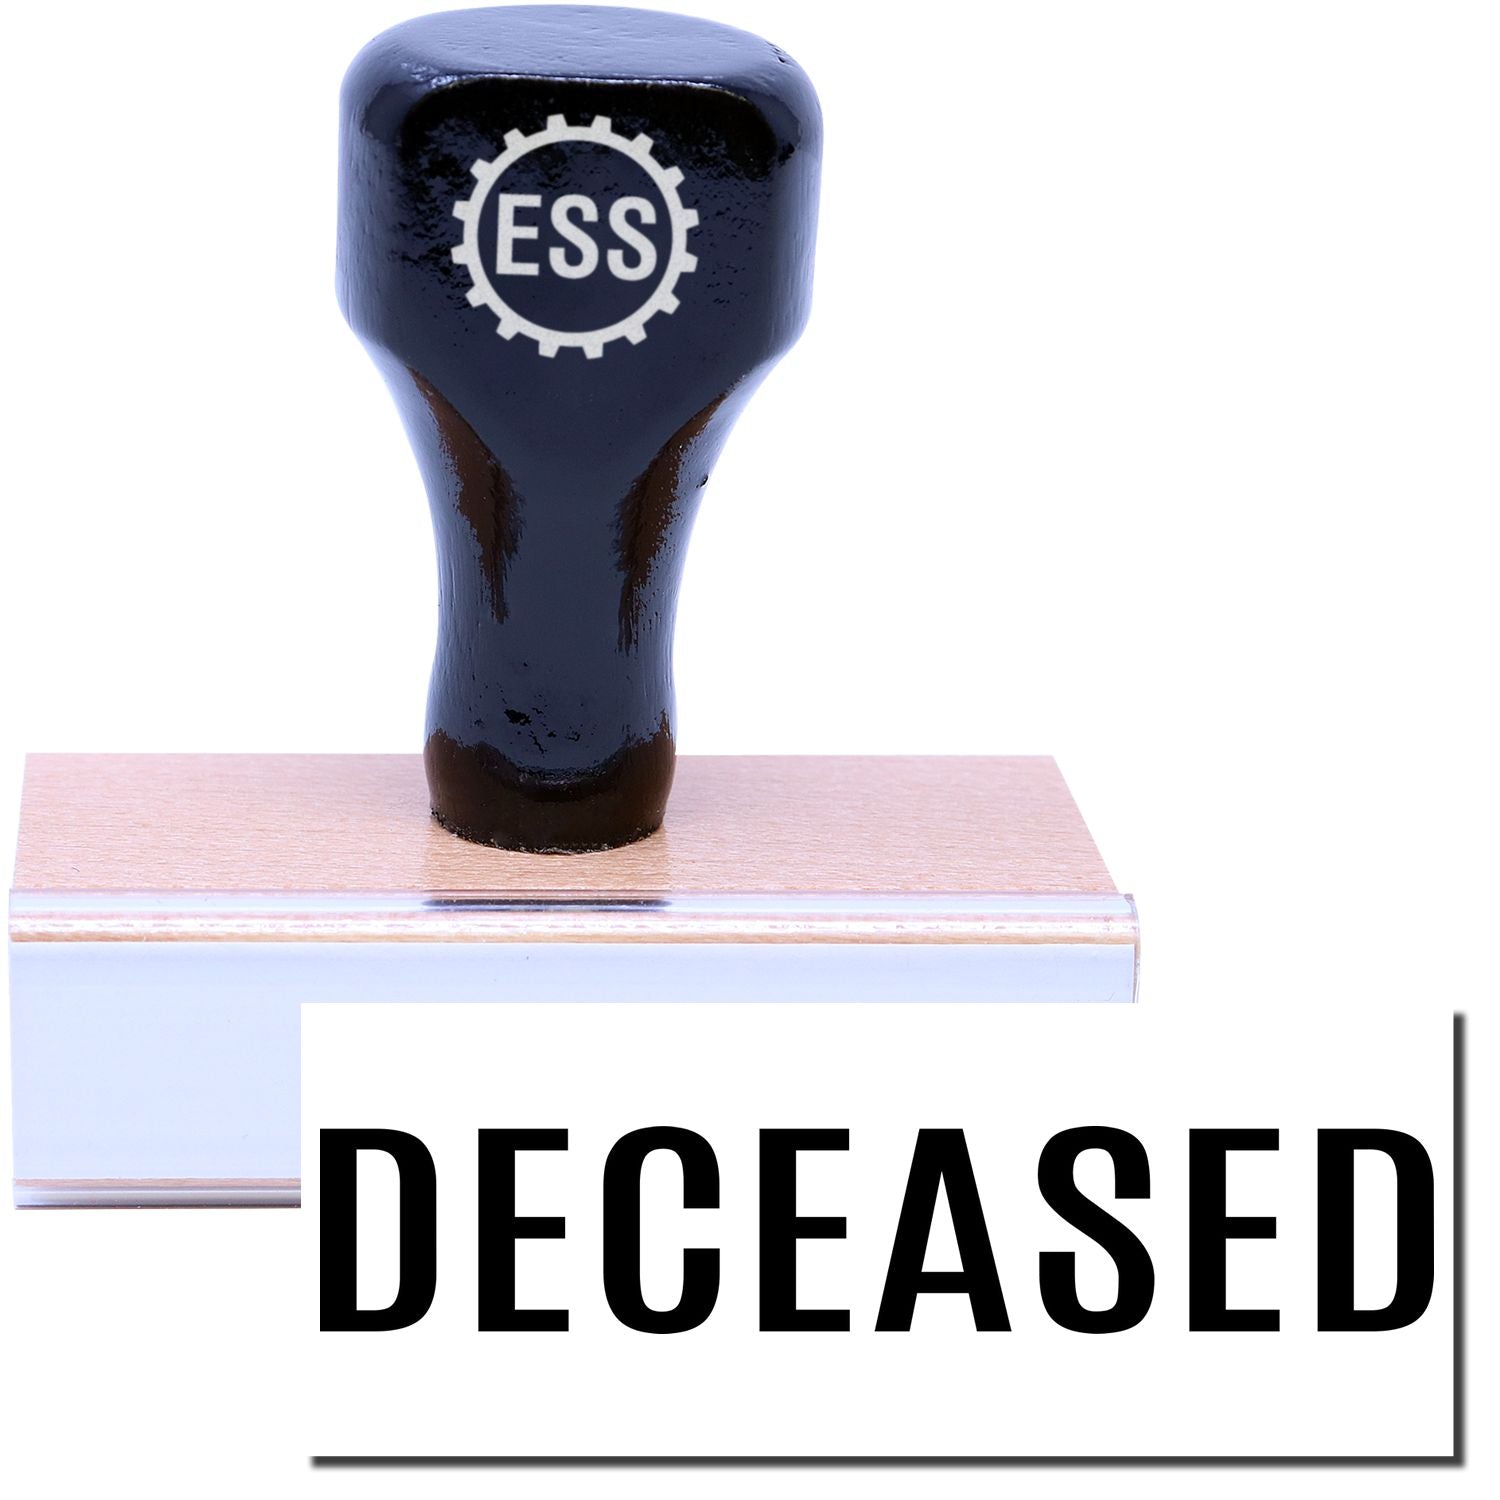 A stock office rubber stamp with a stamped image showing how the text "DECEASED" in bold font is displayed after stamping.